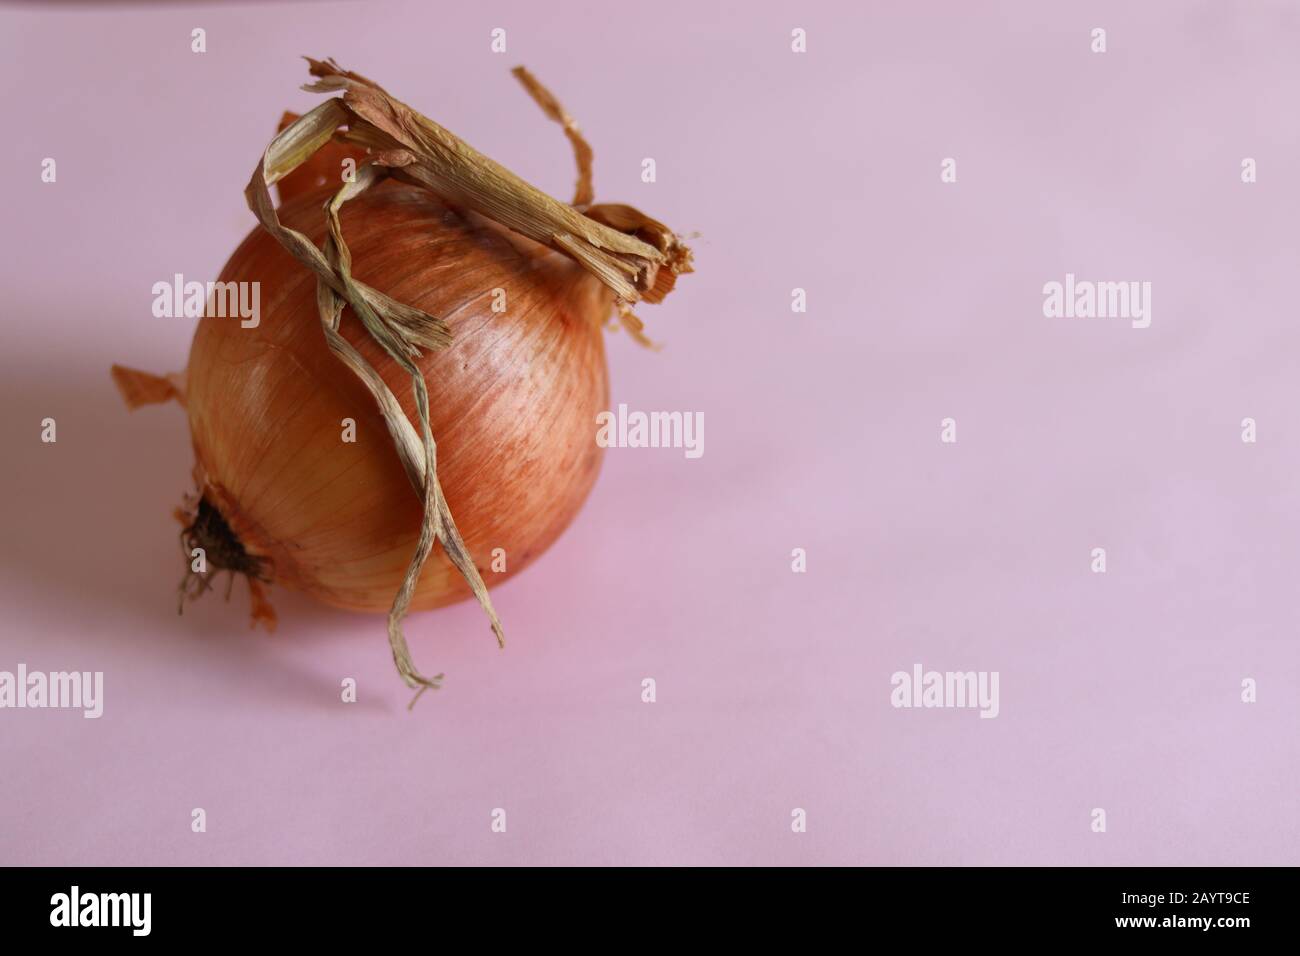 A single onion bulb against a pink background to show concept of gastronomy, cuisine and food industry Stock Photo